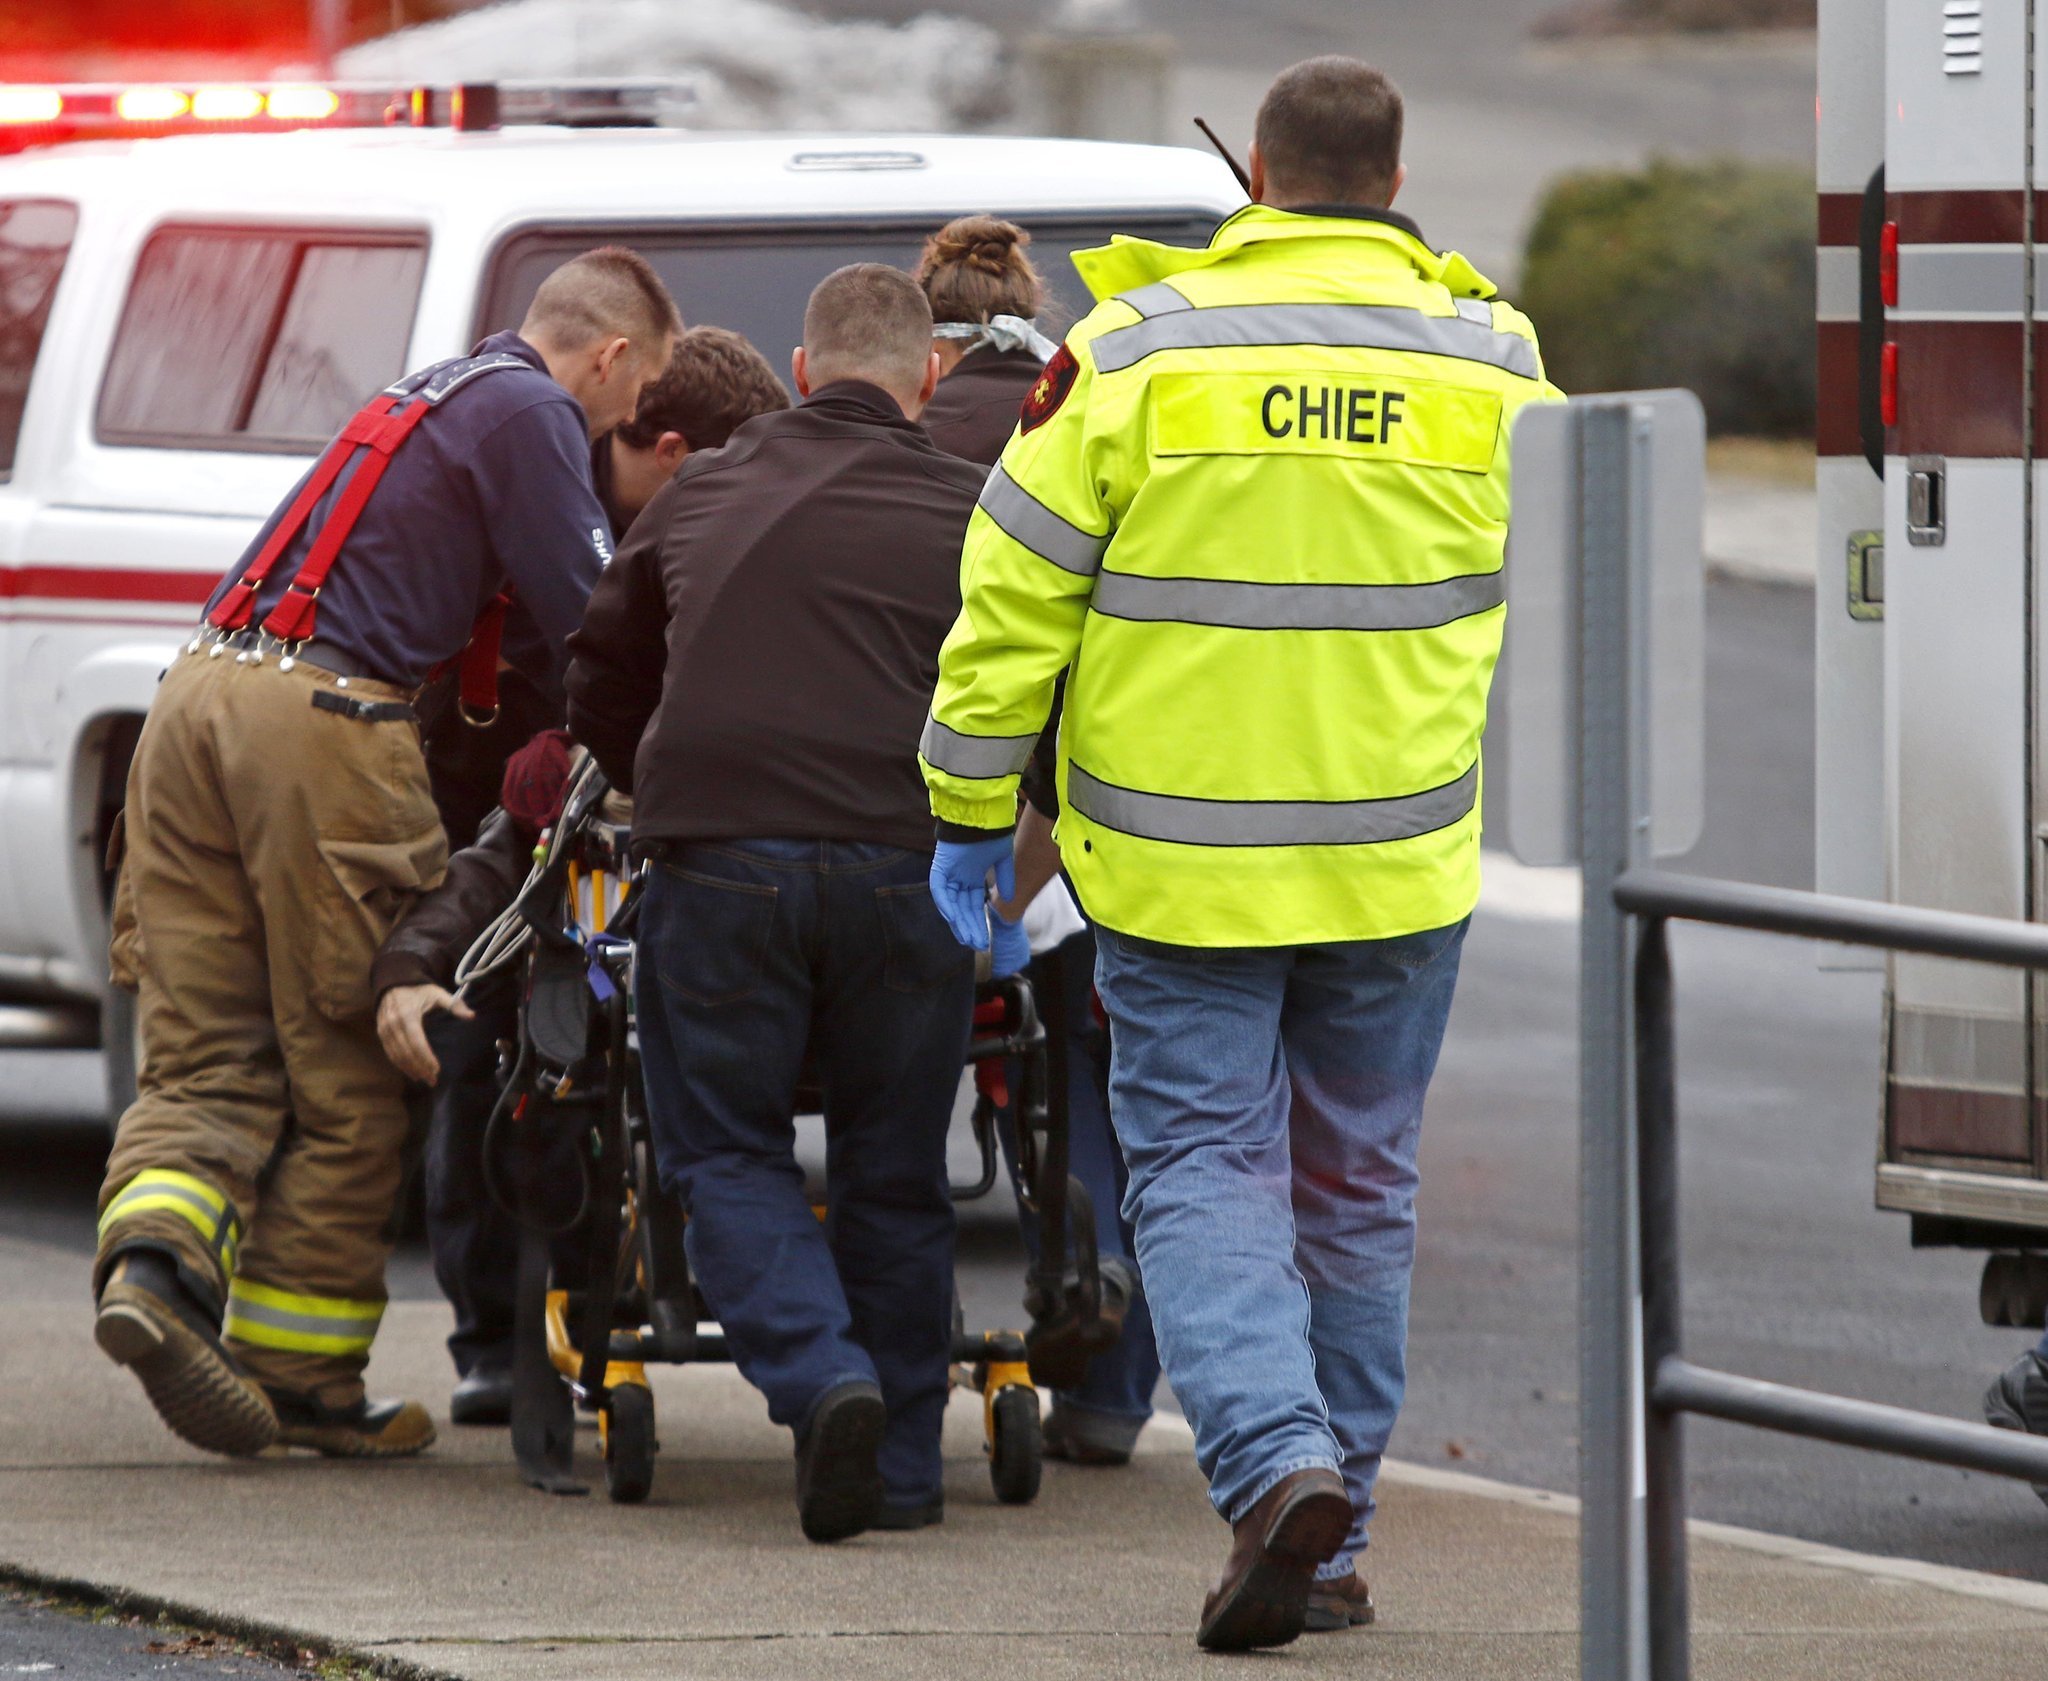 Gunman kills 3, critically wounds another in Idaho shooting spree - Chicago Tribune